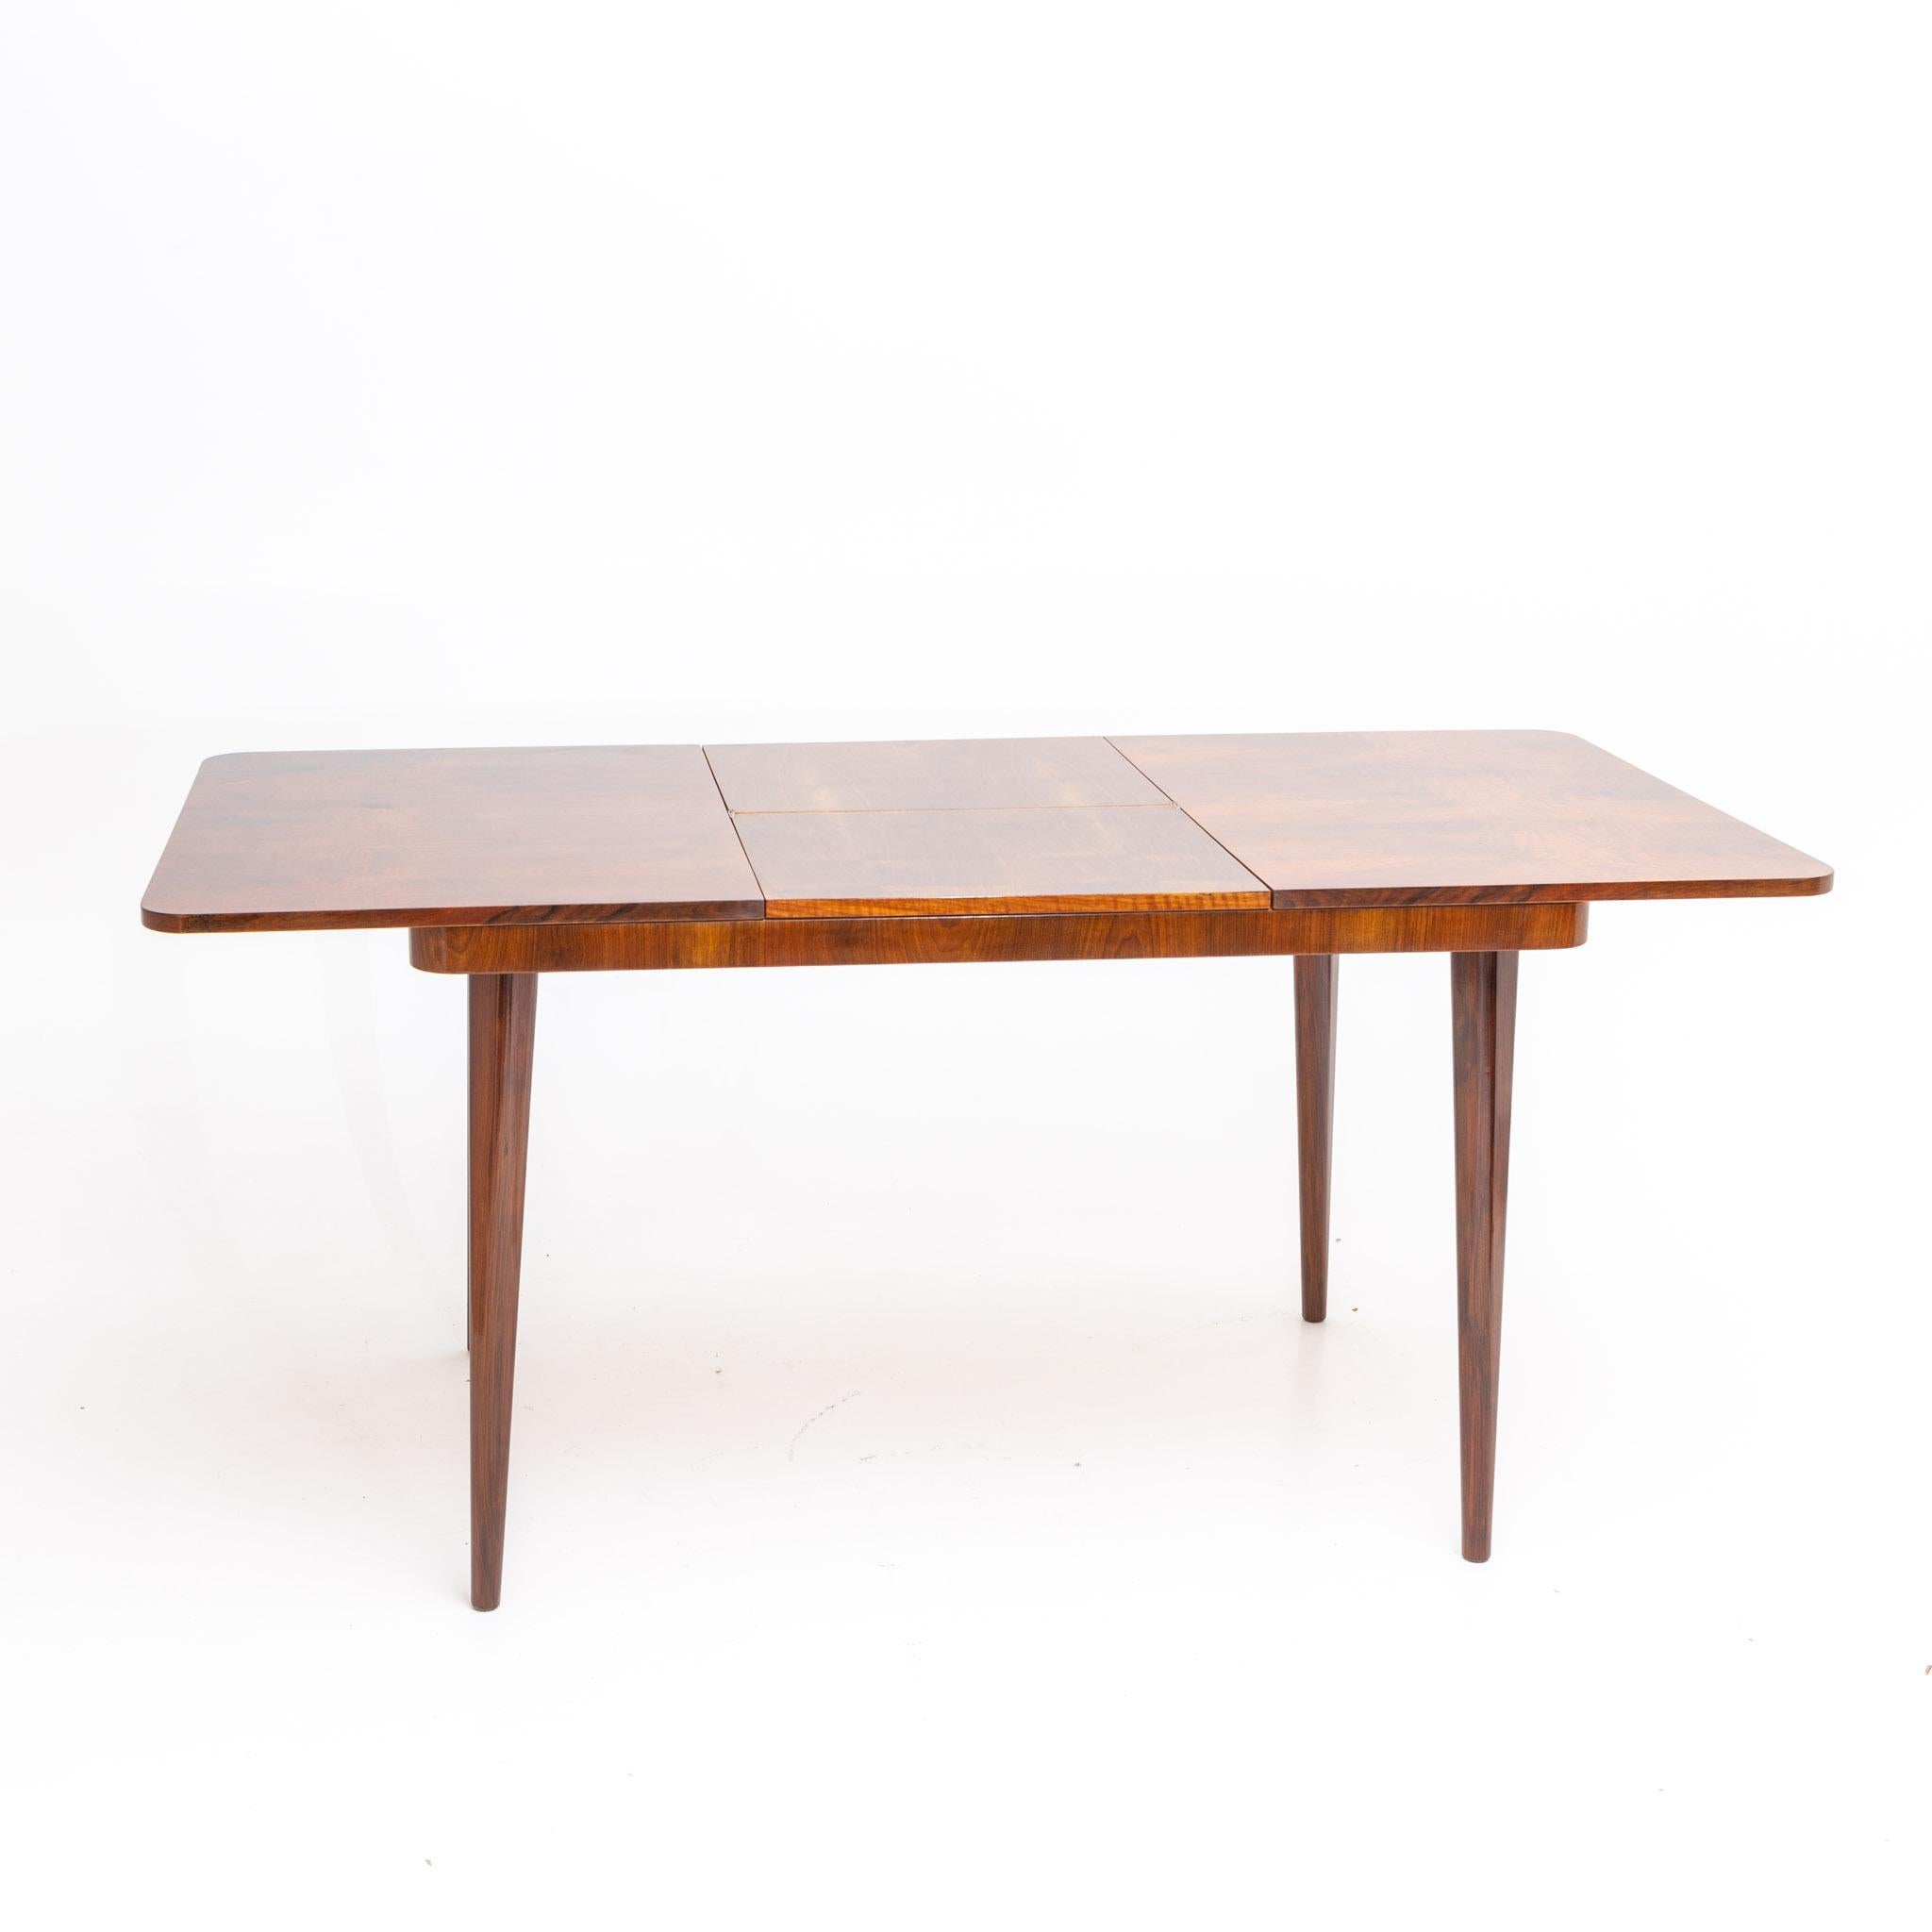 Mid-20th Century Extendable Dining Table by Jindrich Halabala for UP Zavody, Czechoslovakia, 1950 For Sale